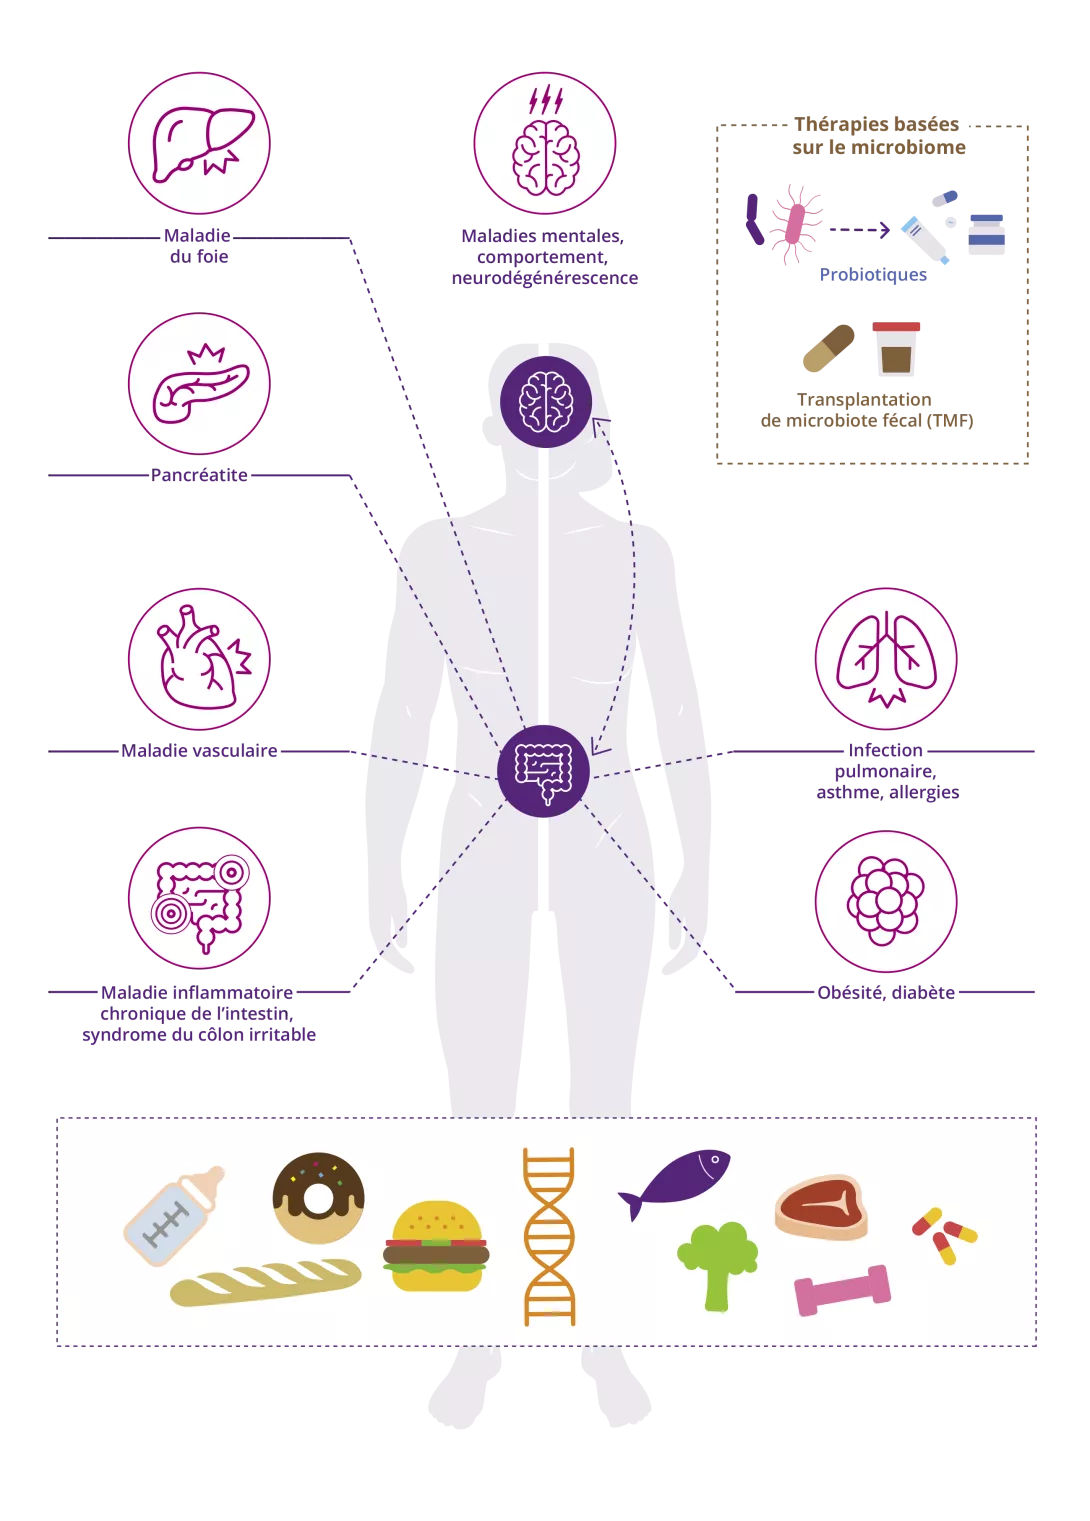 [infographic] The role of the gut microbiota in human health (FR)